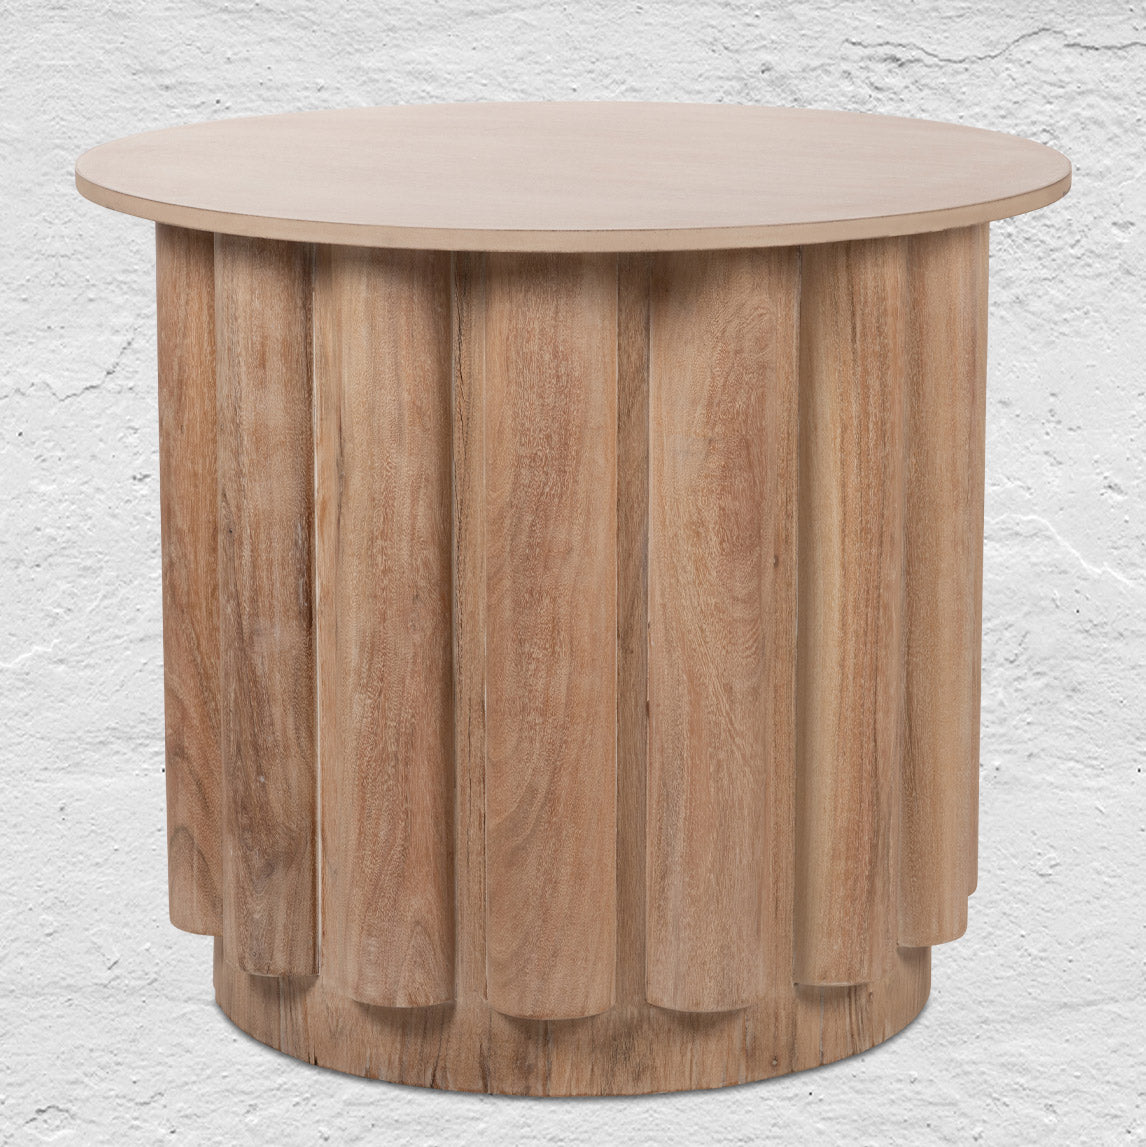 Eden Rock Table Base in Bleached Acacia